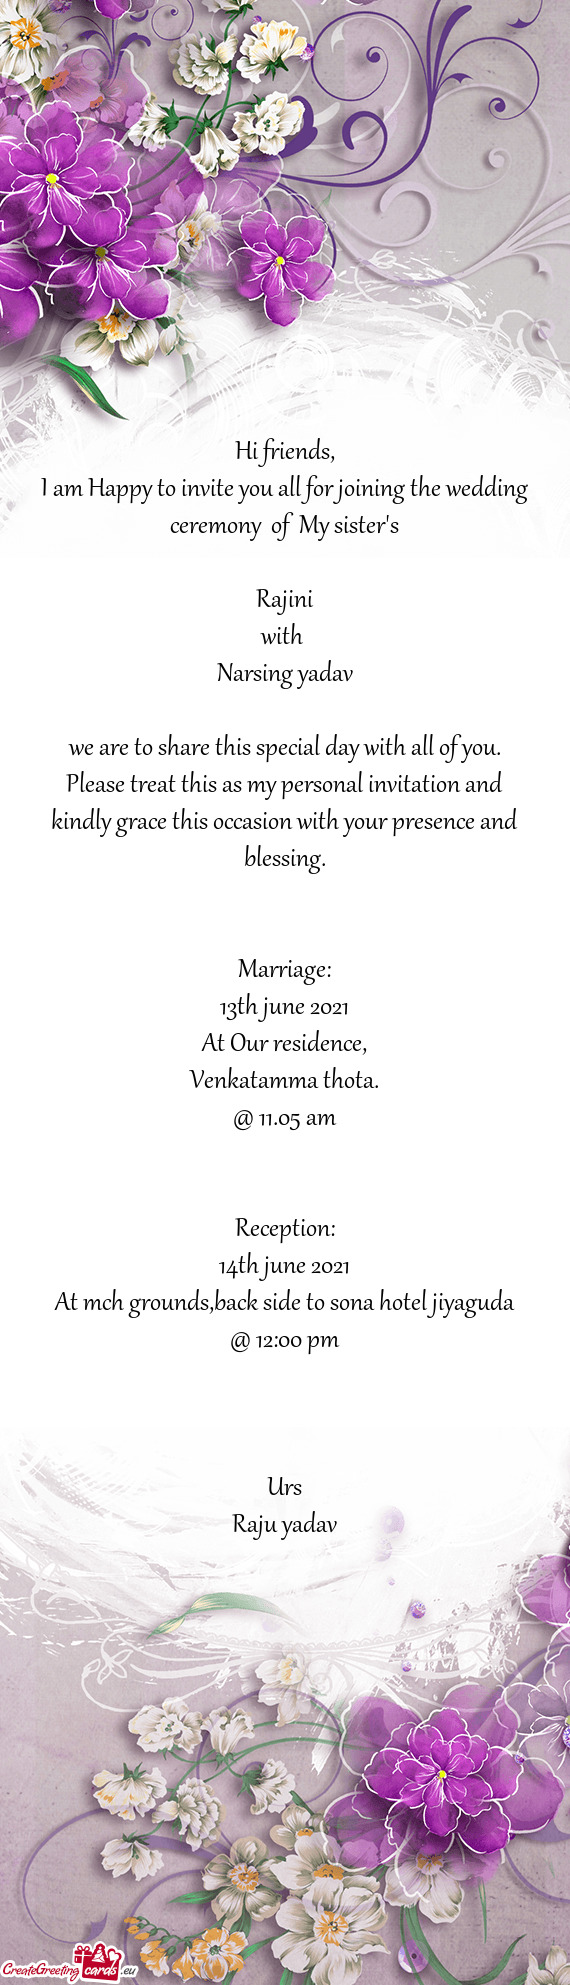 I am Happy to invite you all for joining the wedding ceremony of My sister